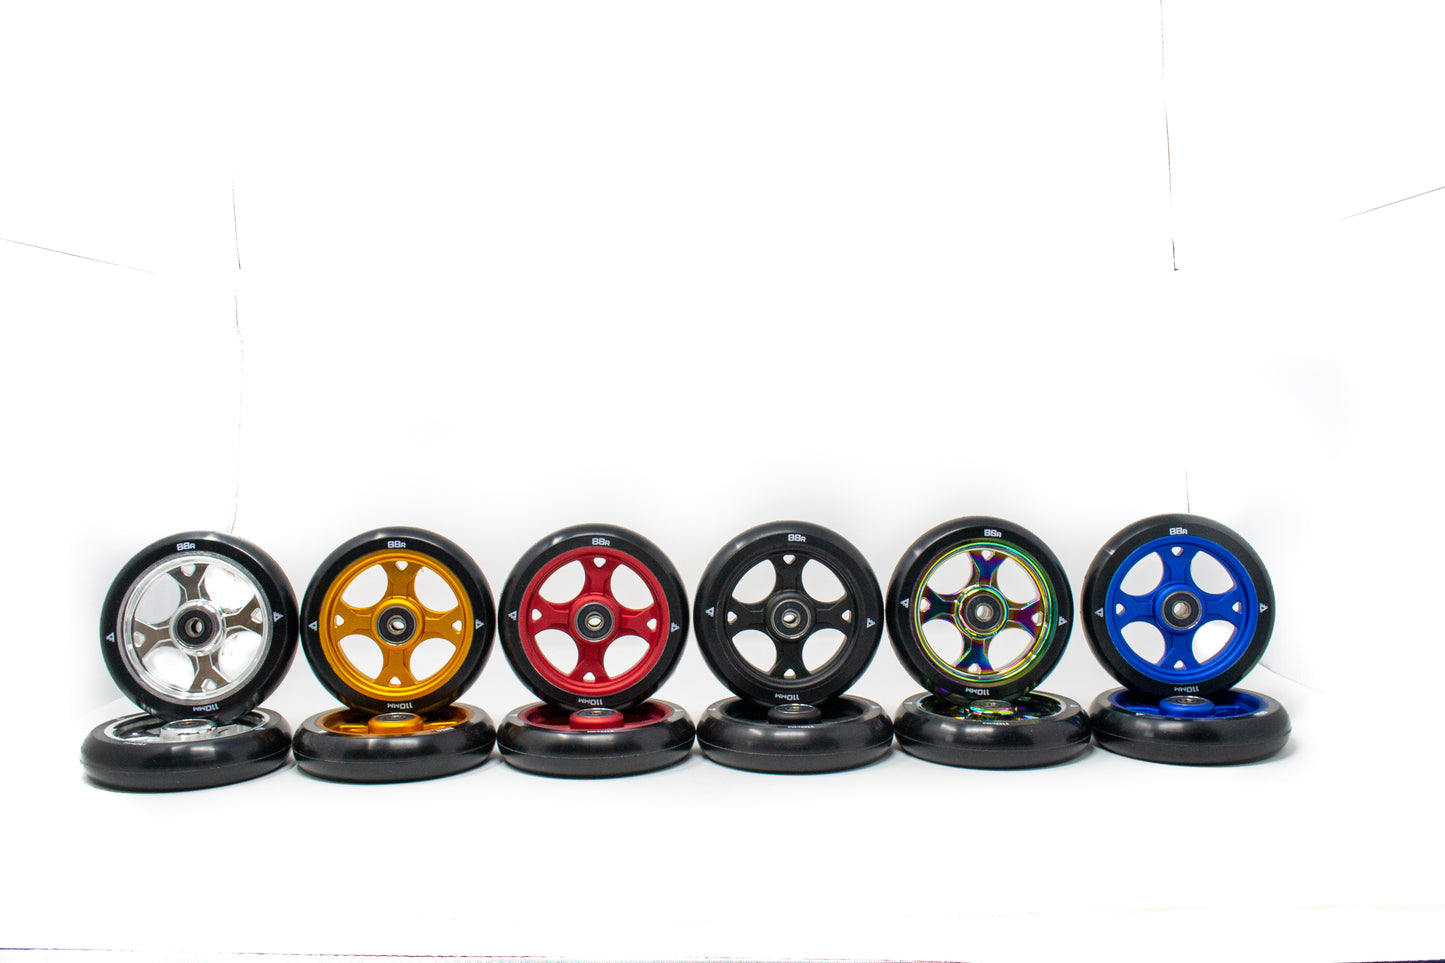 Trynyty Gothic Wheels 110mm